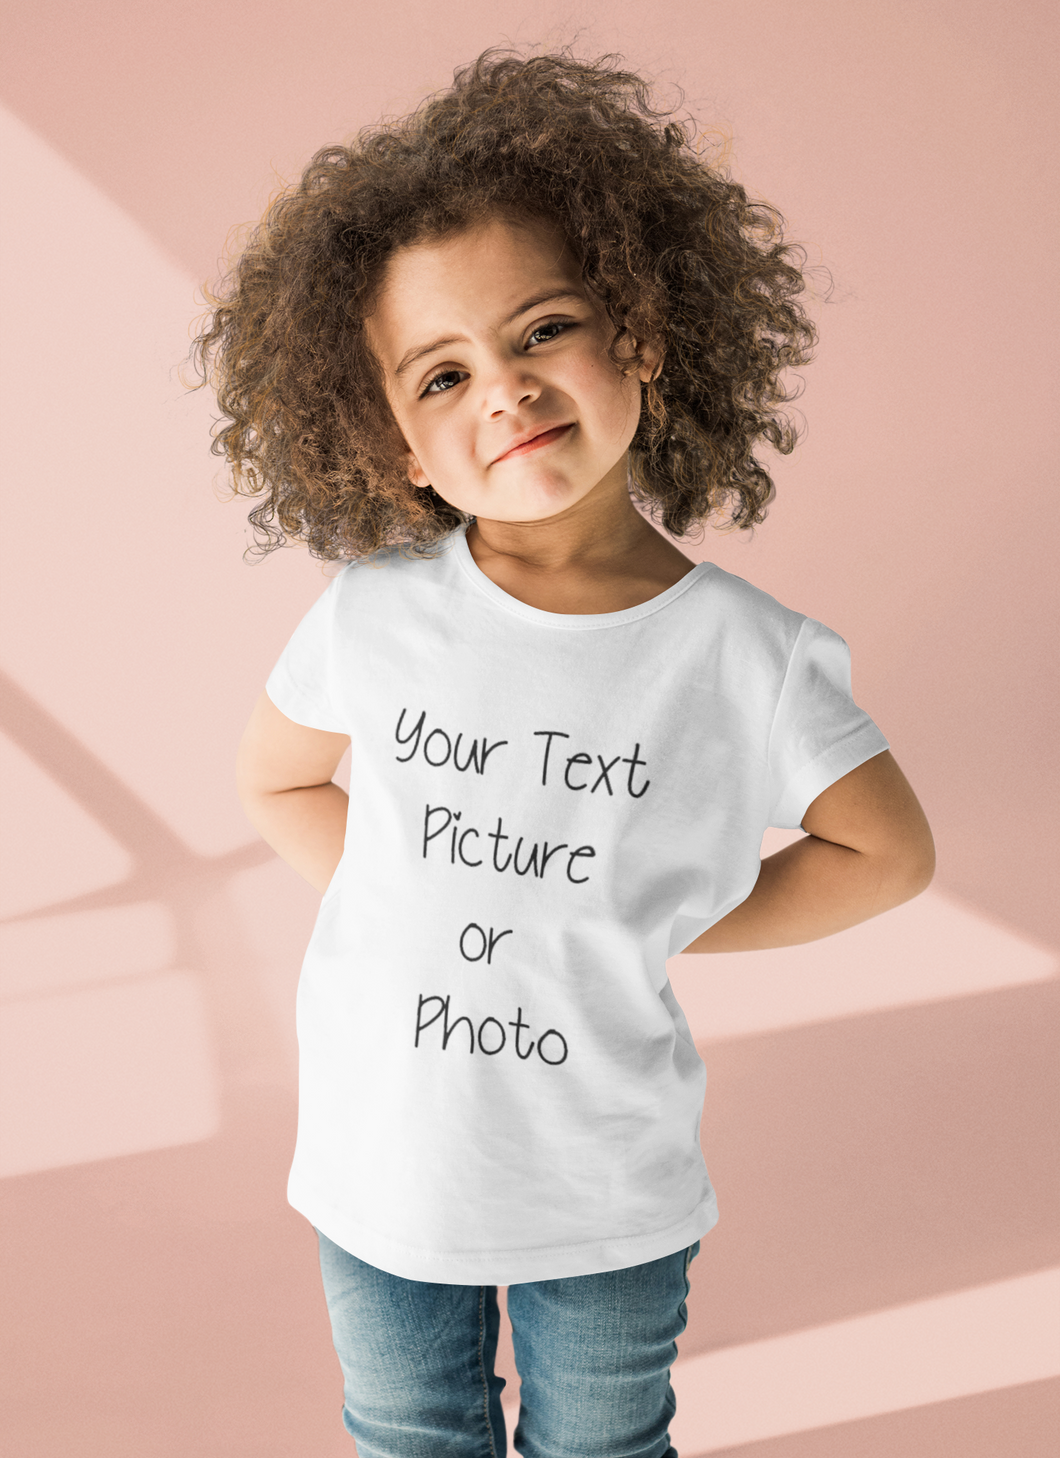 Personalised Kids – Our Print Shop